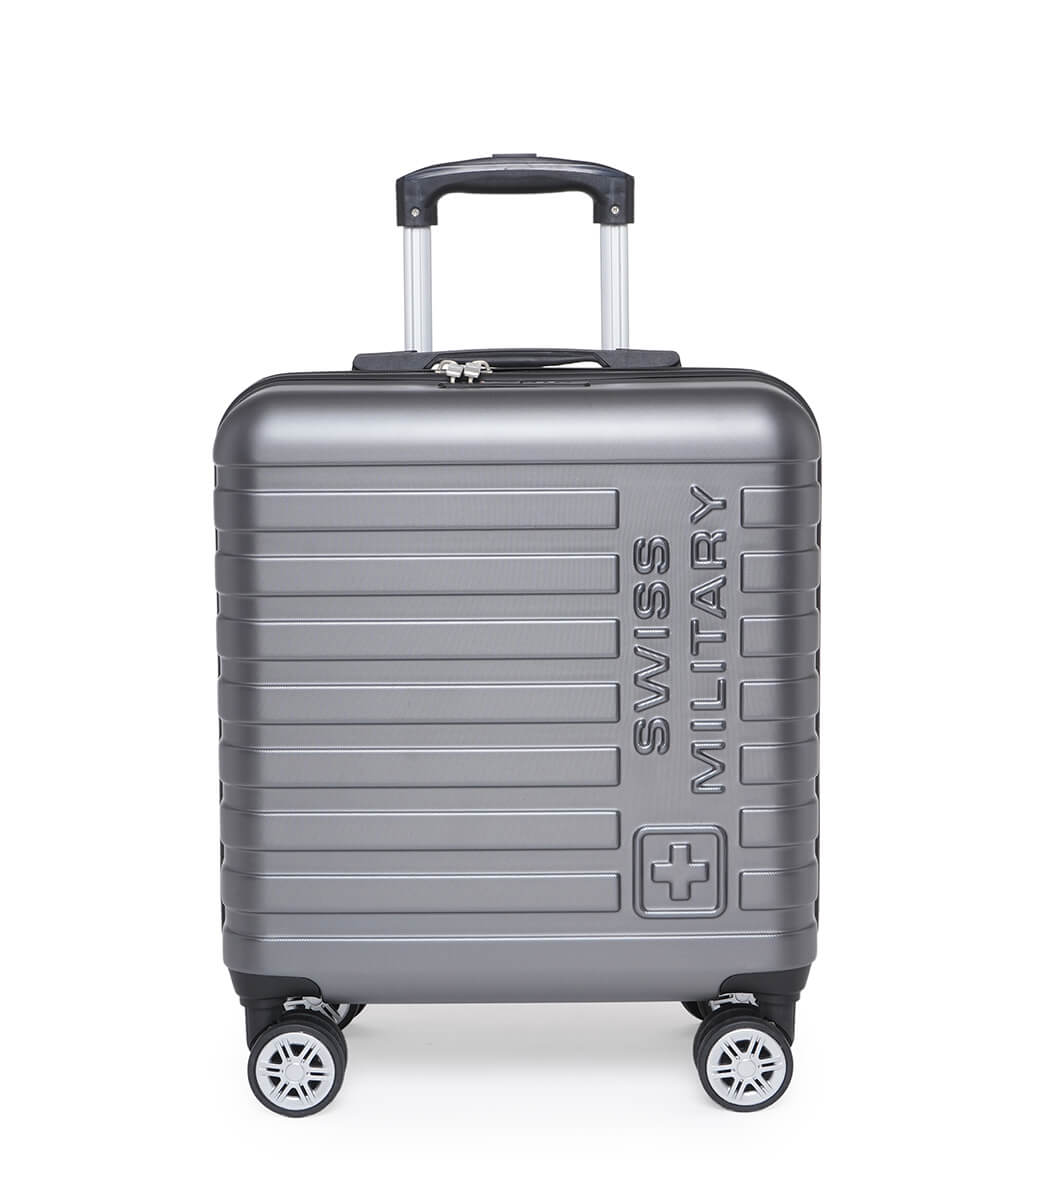  travel in style with the Dapper Hard Trolley Overnighter With 8 wheels for smooth maneuvering